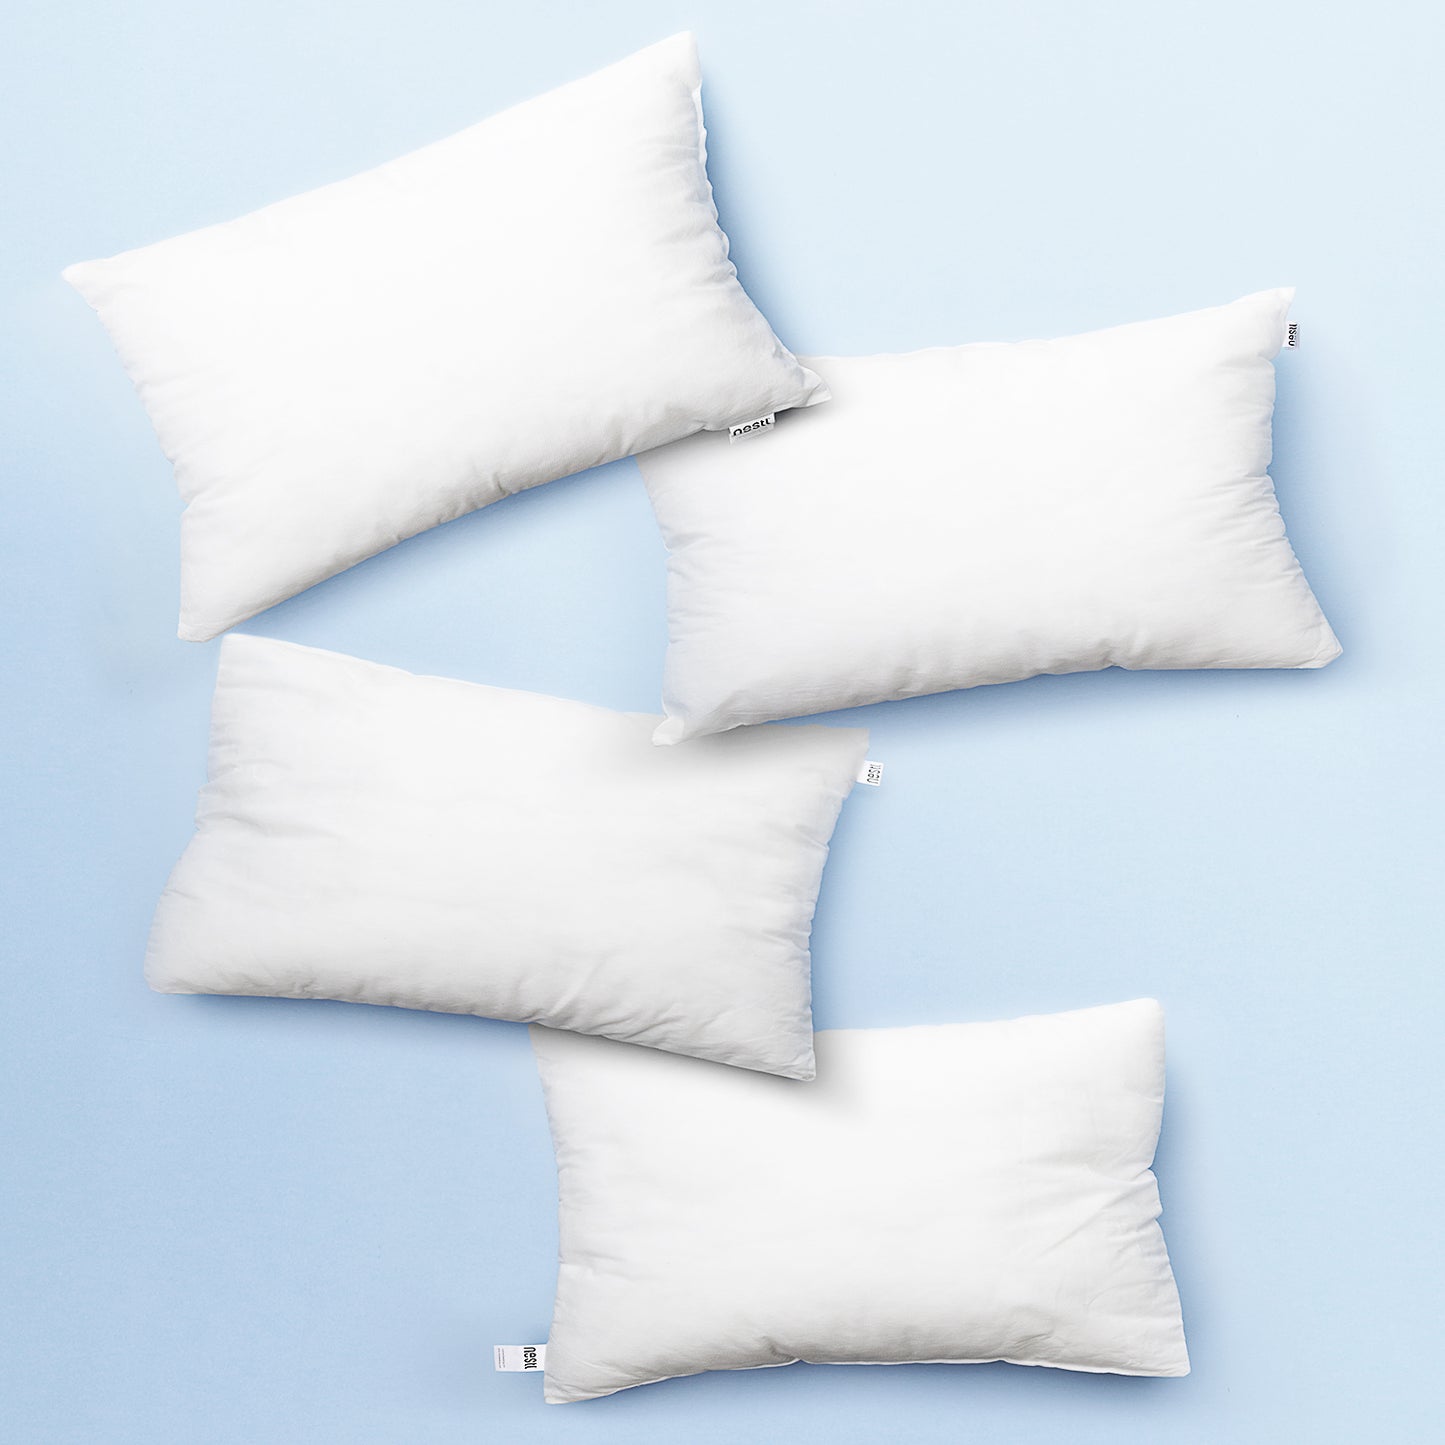 Pack of 2 12X20 Pillow Inserts-Decorative Shredded Memory Foam